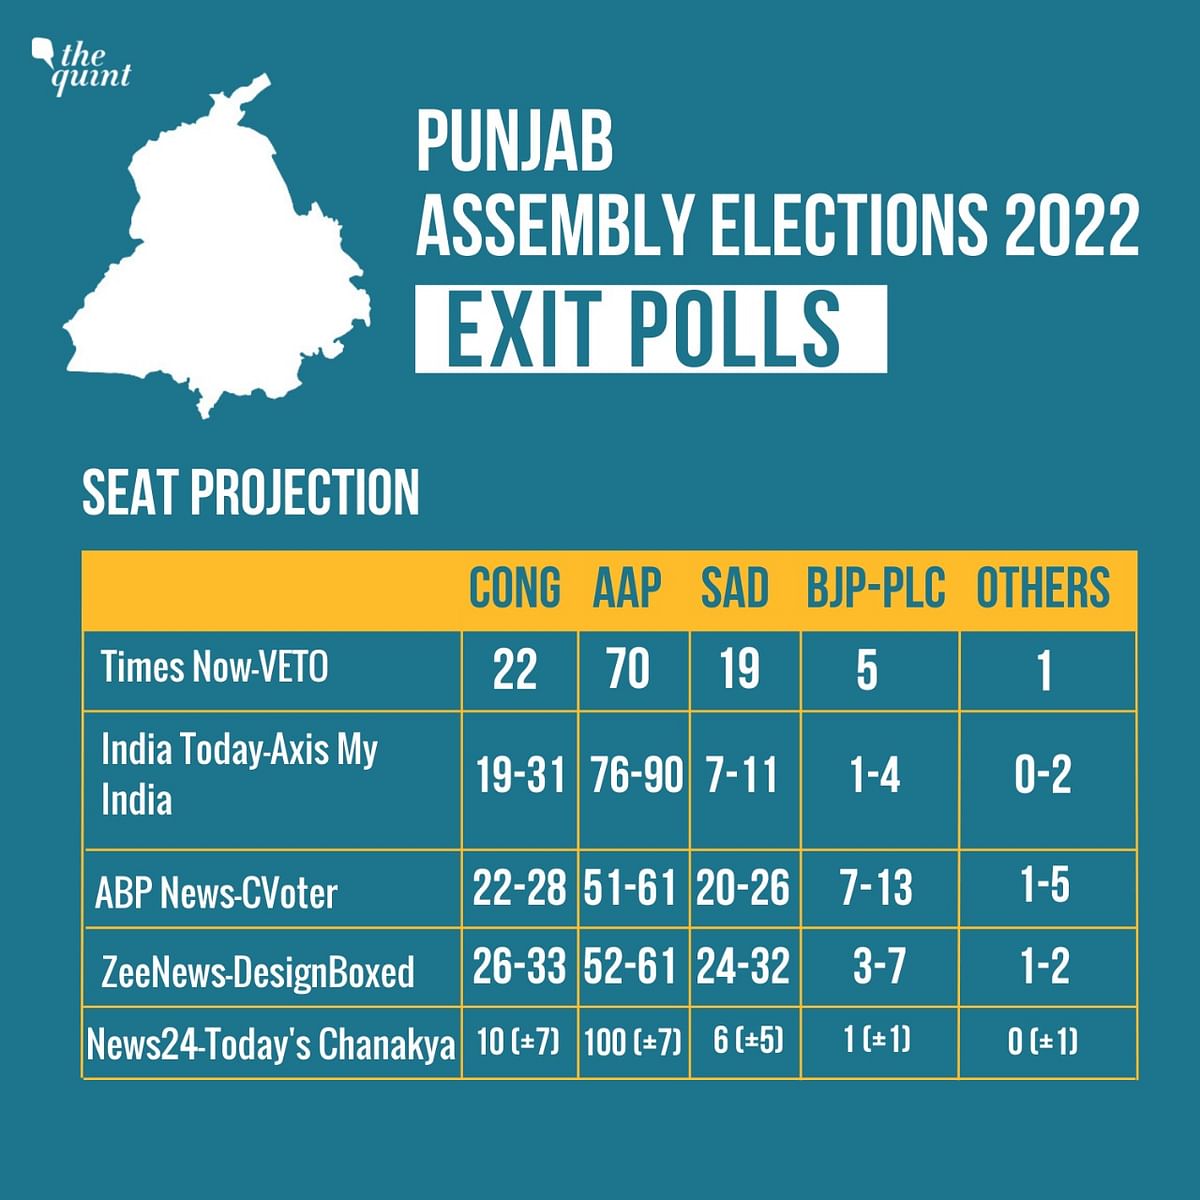 The Quint decodes exit polls for UP, Punjab, Goa, Manipur, and Uttarakhand. The votes will be counted on 10 March.